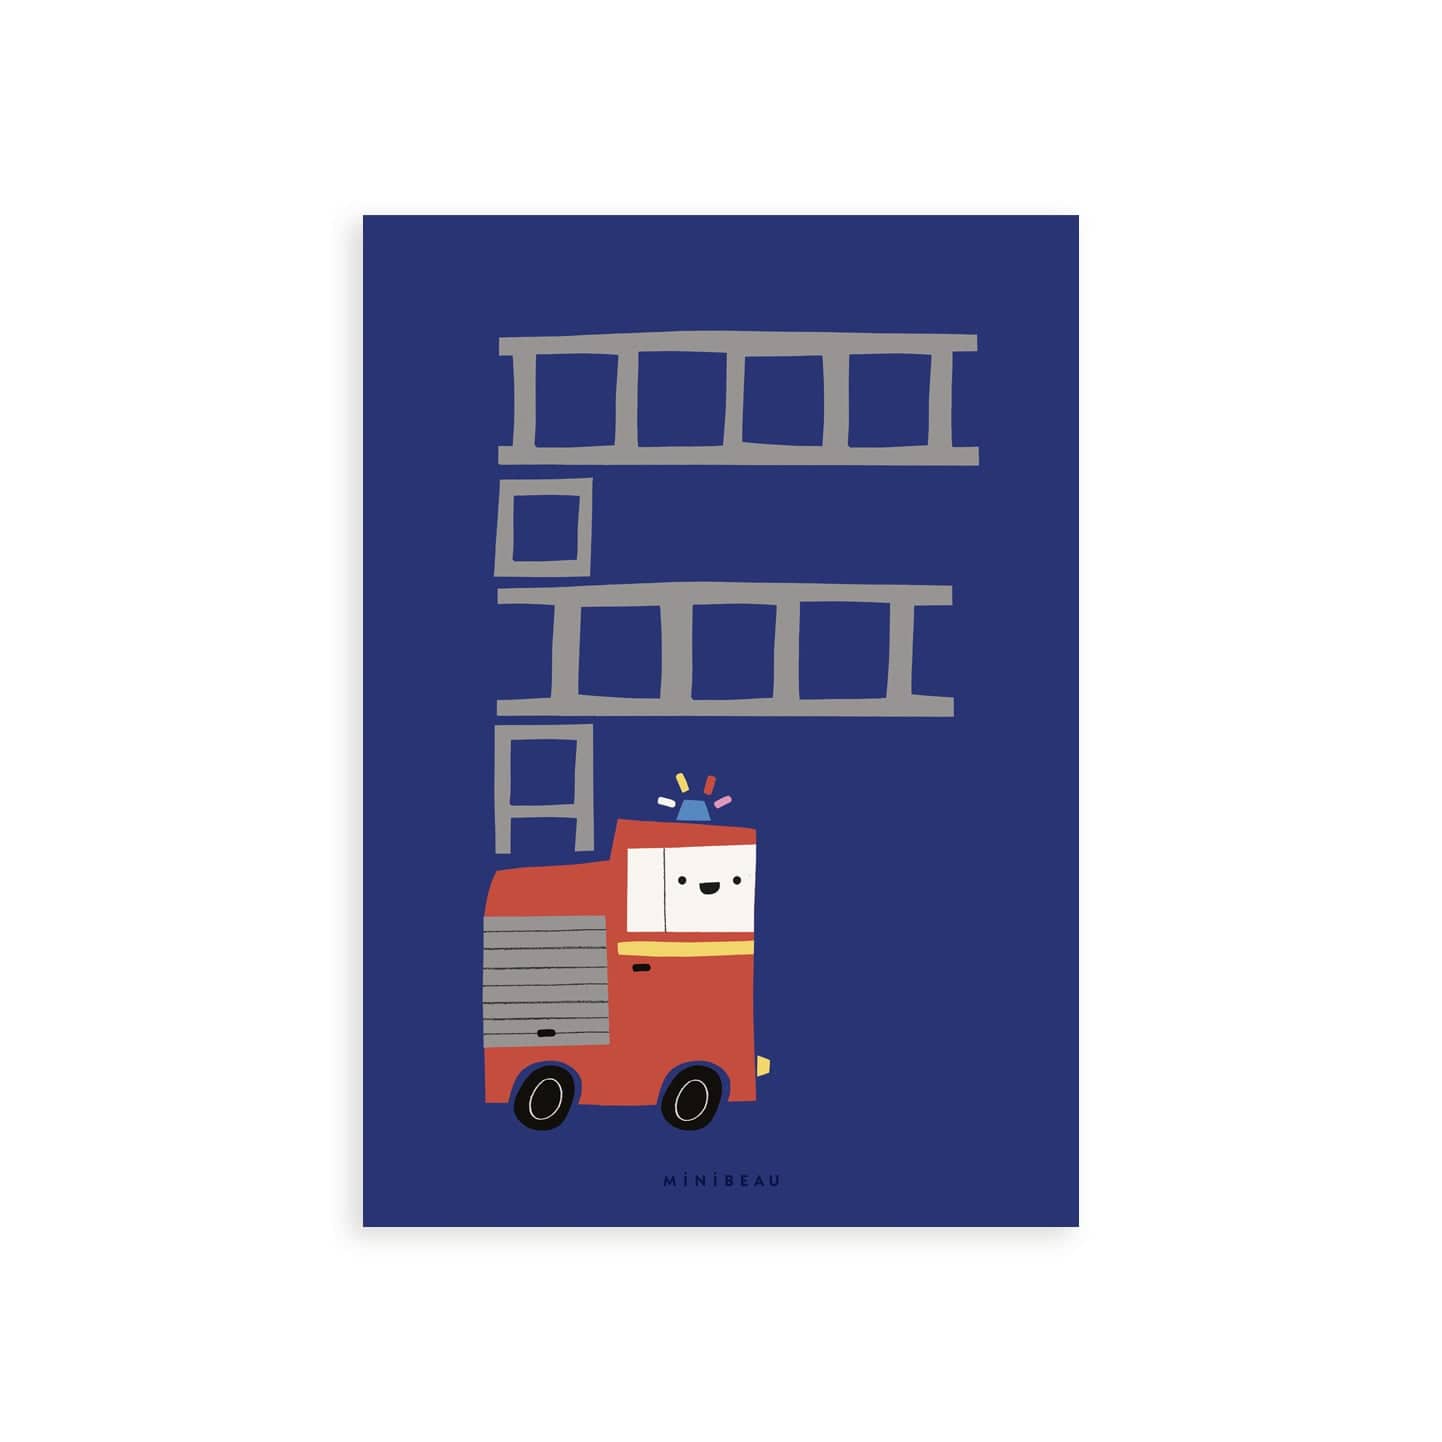 Our Happy Alphabet 'F' Art Print shows a red fire engine with its ladder raised in the shape of the letter F, with its blue light flashing on a dark blue background.